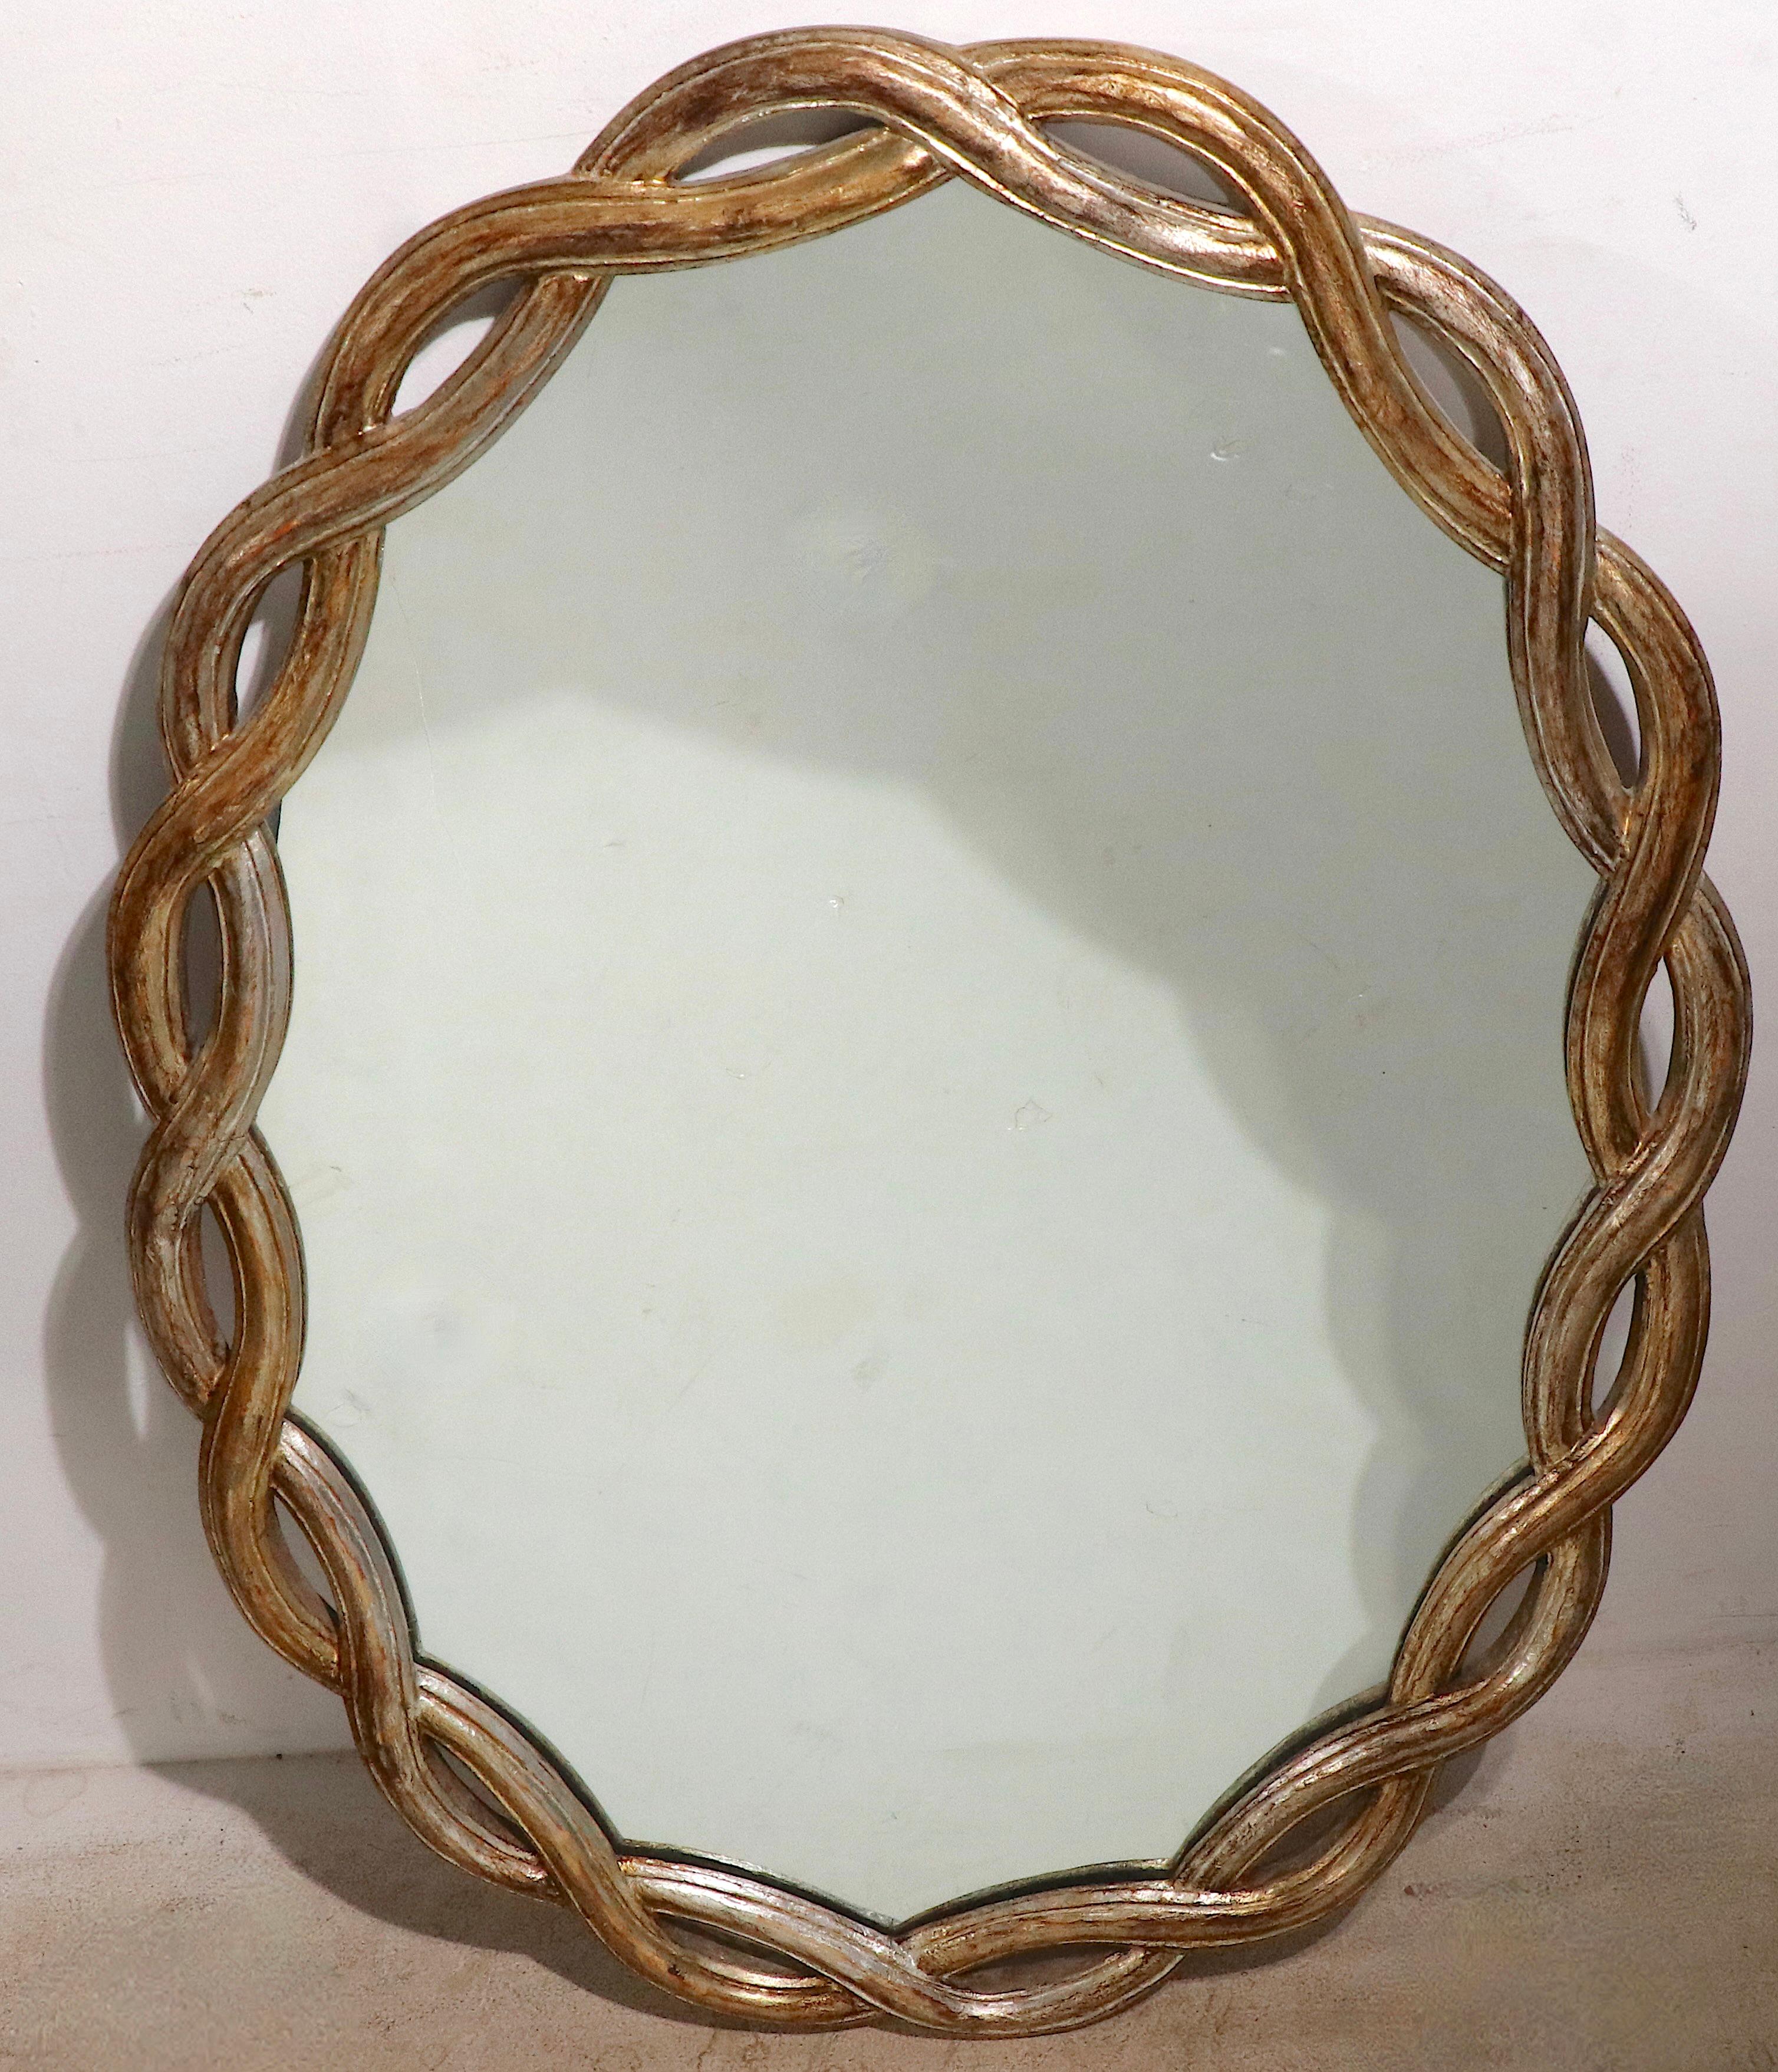 Super chic silver gilt mirror of hand carved wood and glass. The mirror features an open work weave pattern frame, which surrounds the bright and clean mirror center. This example is in very good, clean, original, ready to hang condition, showing